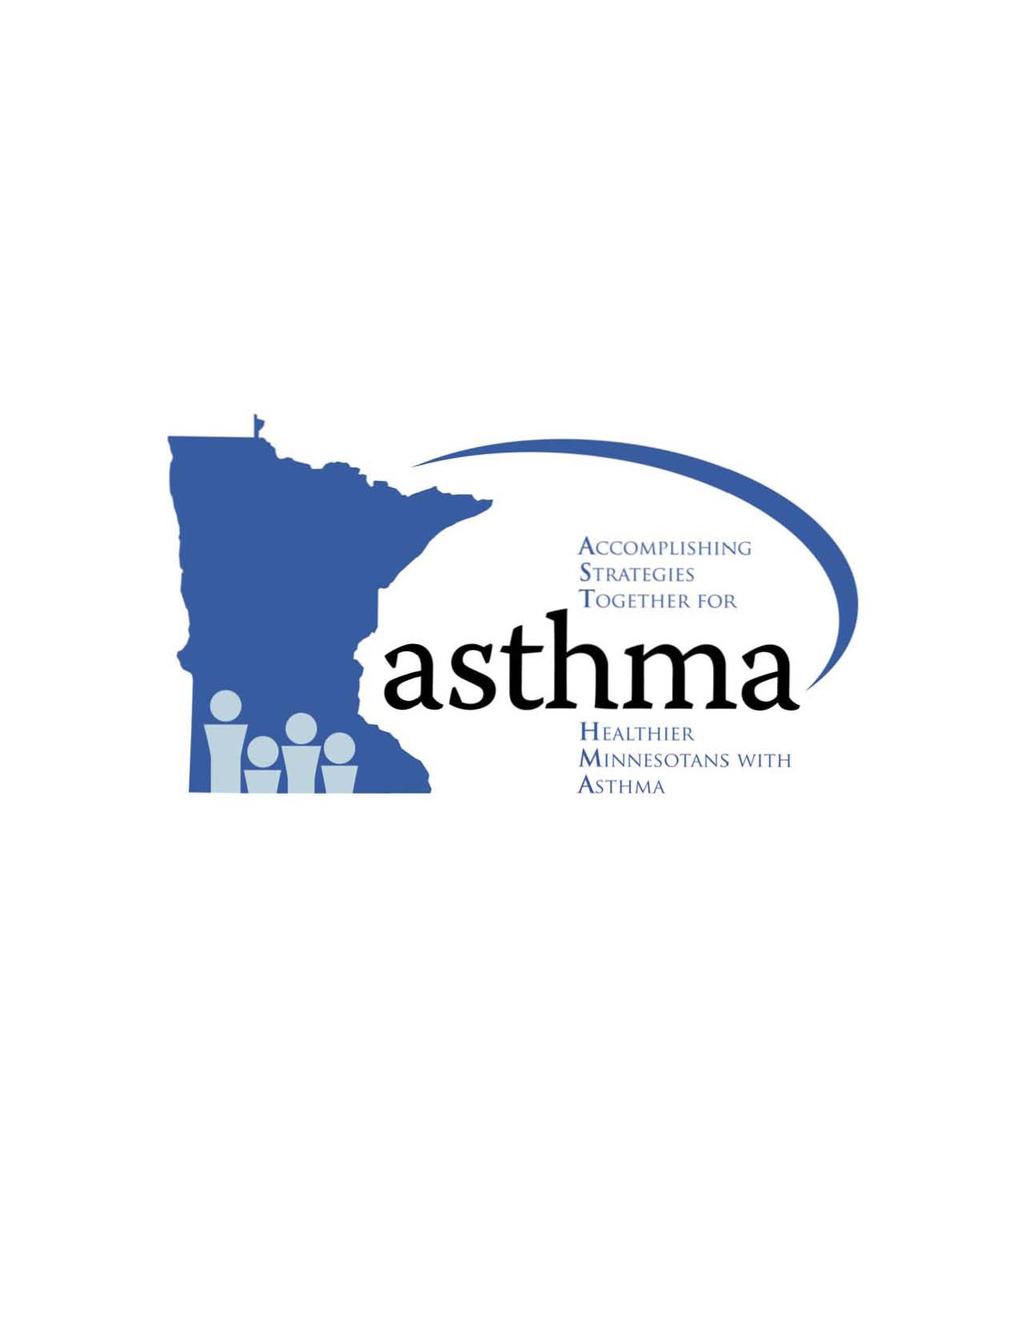 Asthma in Minnesota 2005 Epidemiology Report ACCOMPLISHING STRATEGIES asthma HEALTHIER MINNESOTANS WITH ASTHMA Asthma